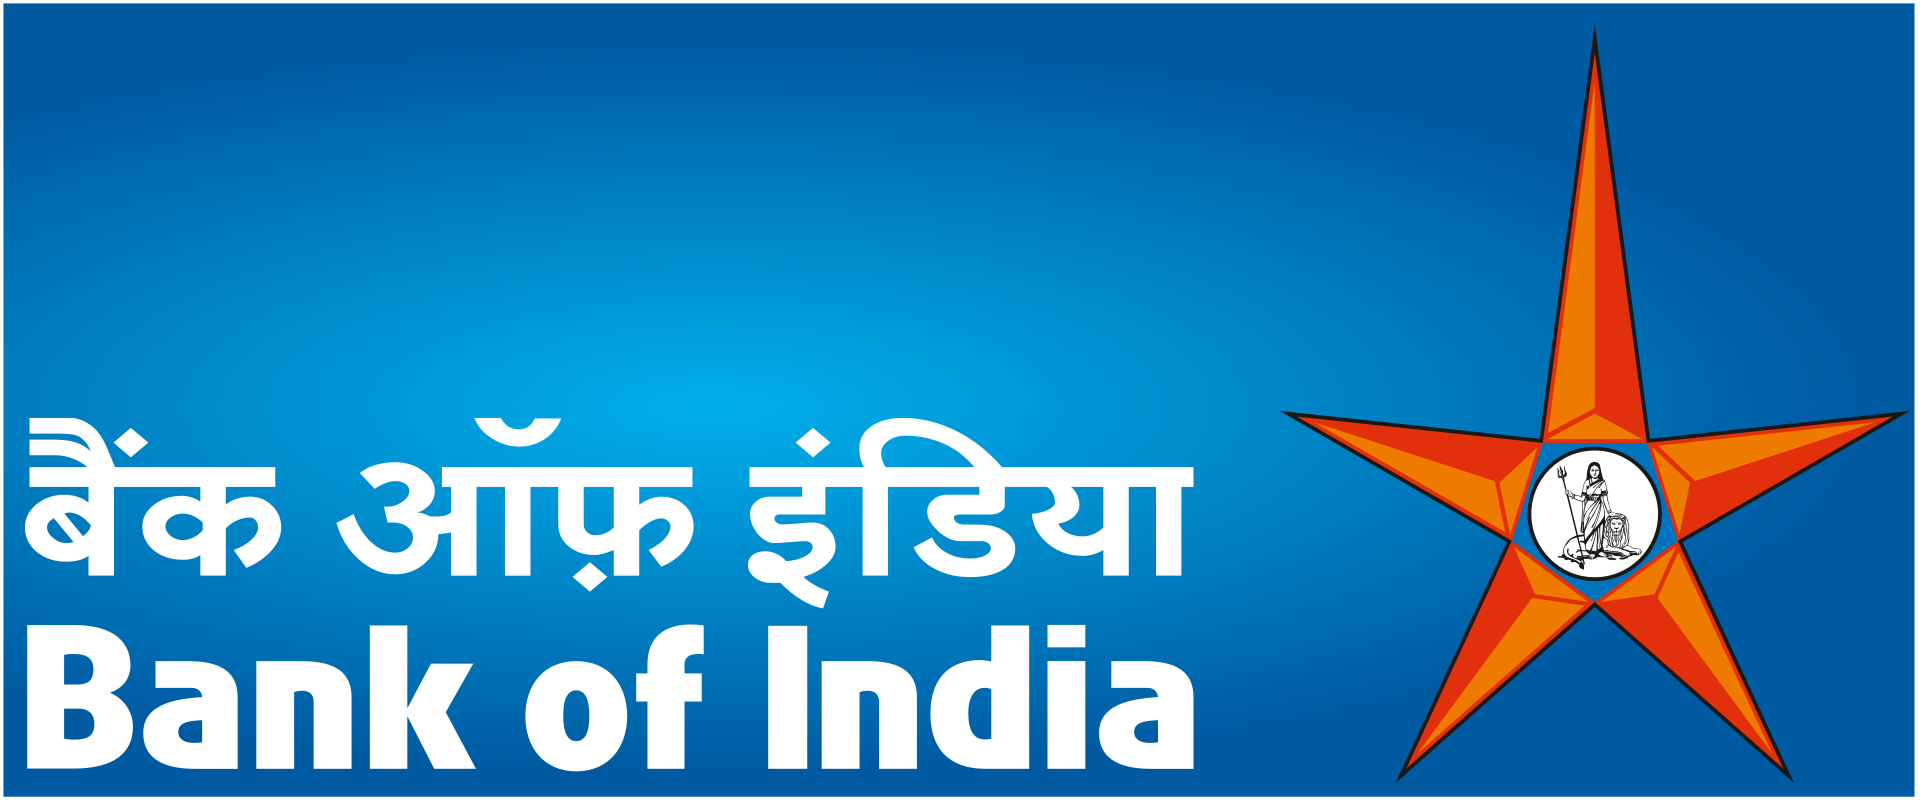 Bank of India - Online Internet Banking and Personal Banking Services - BOI